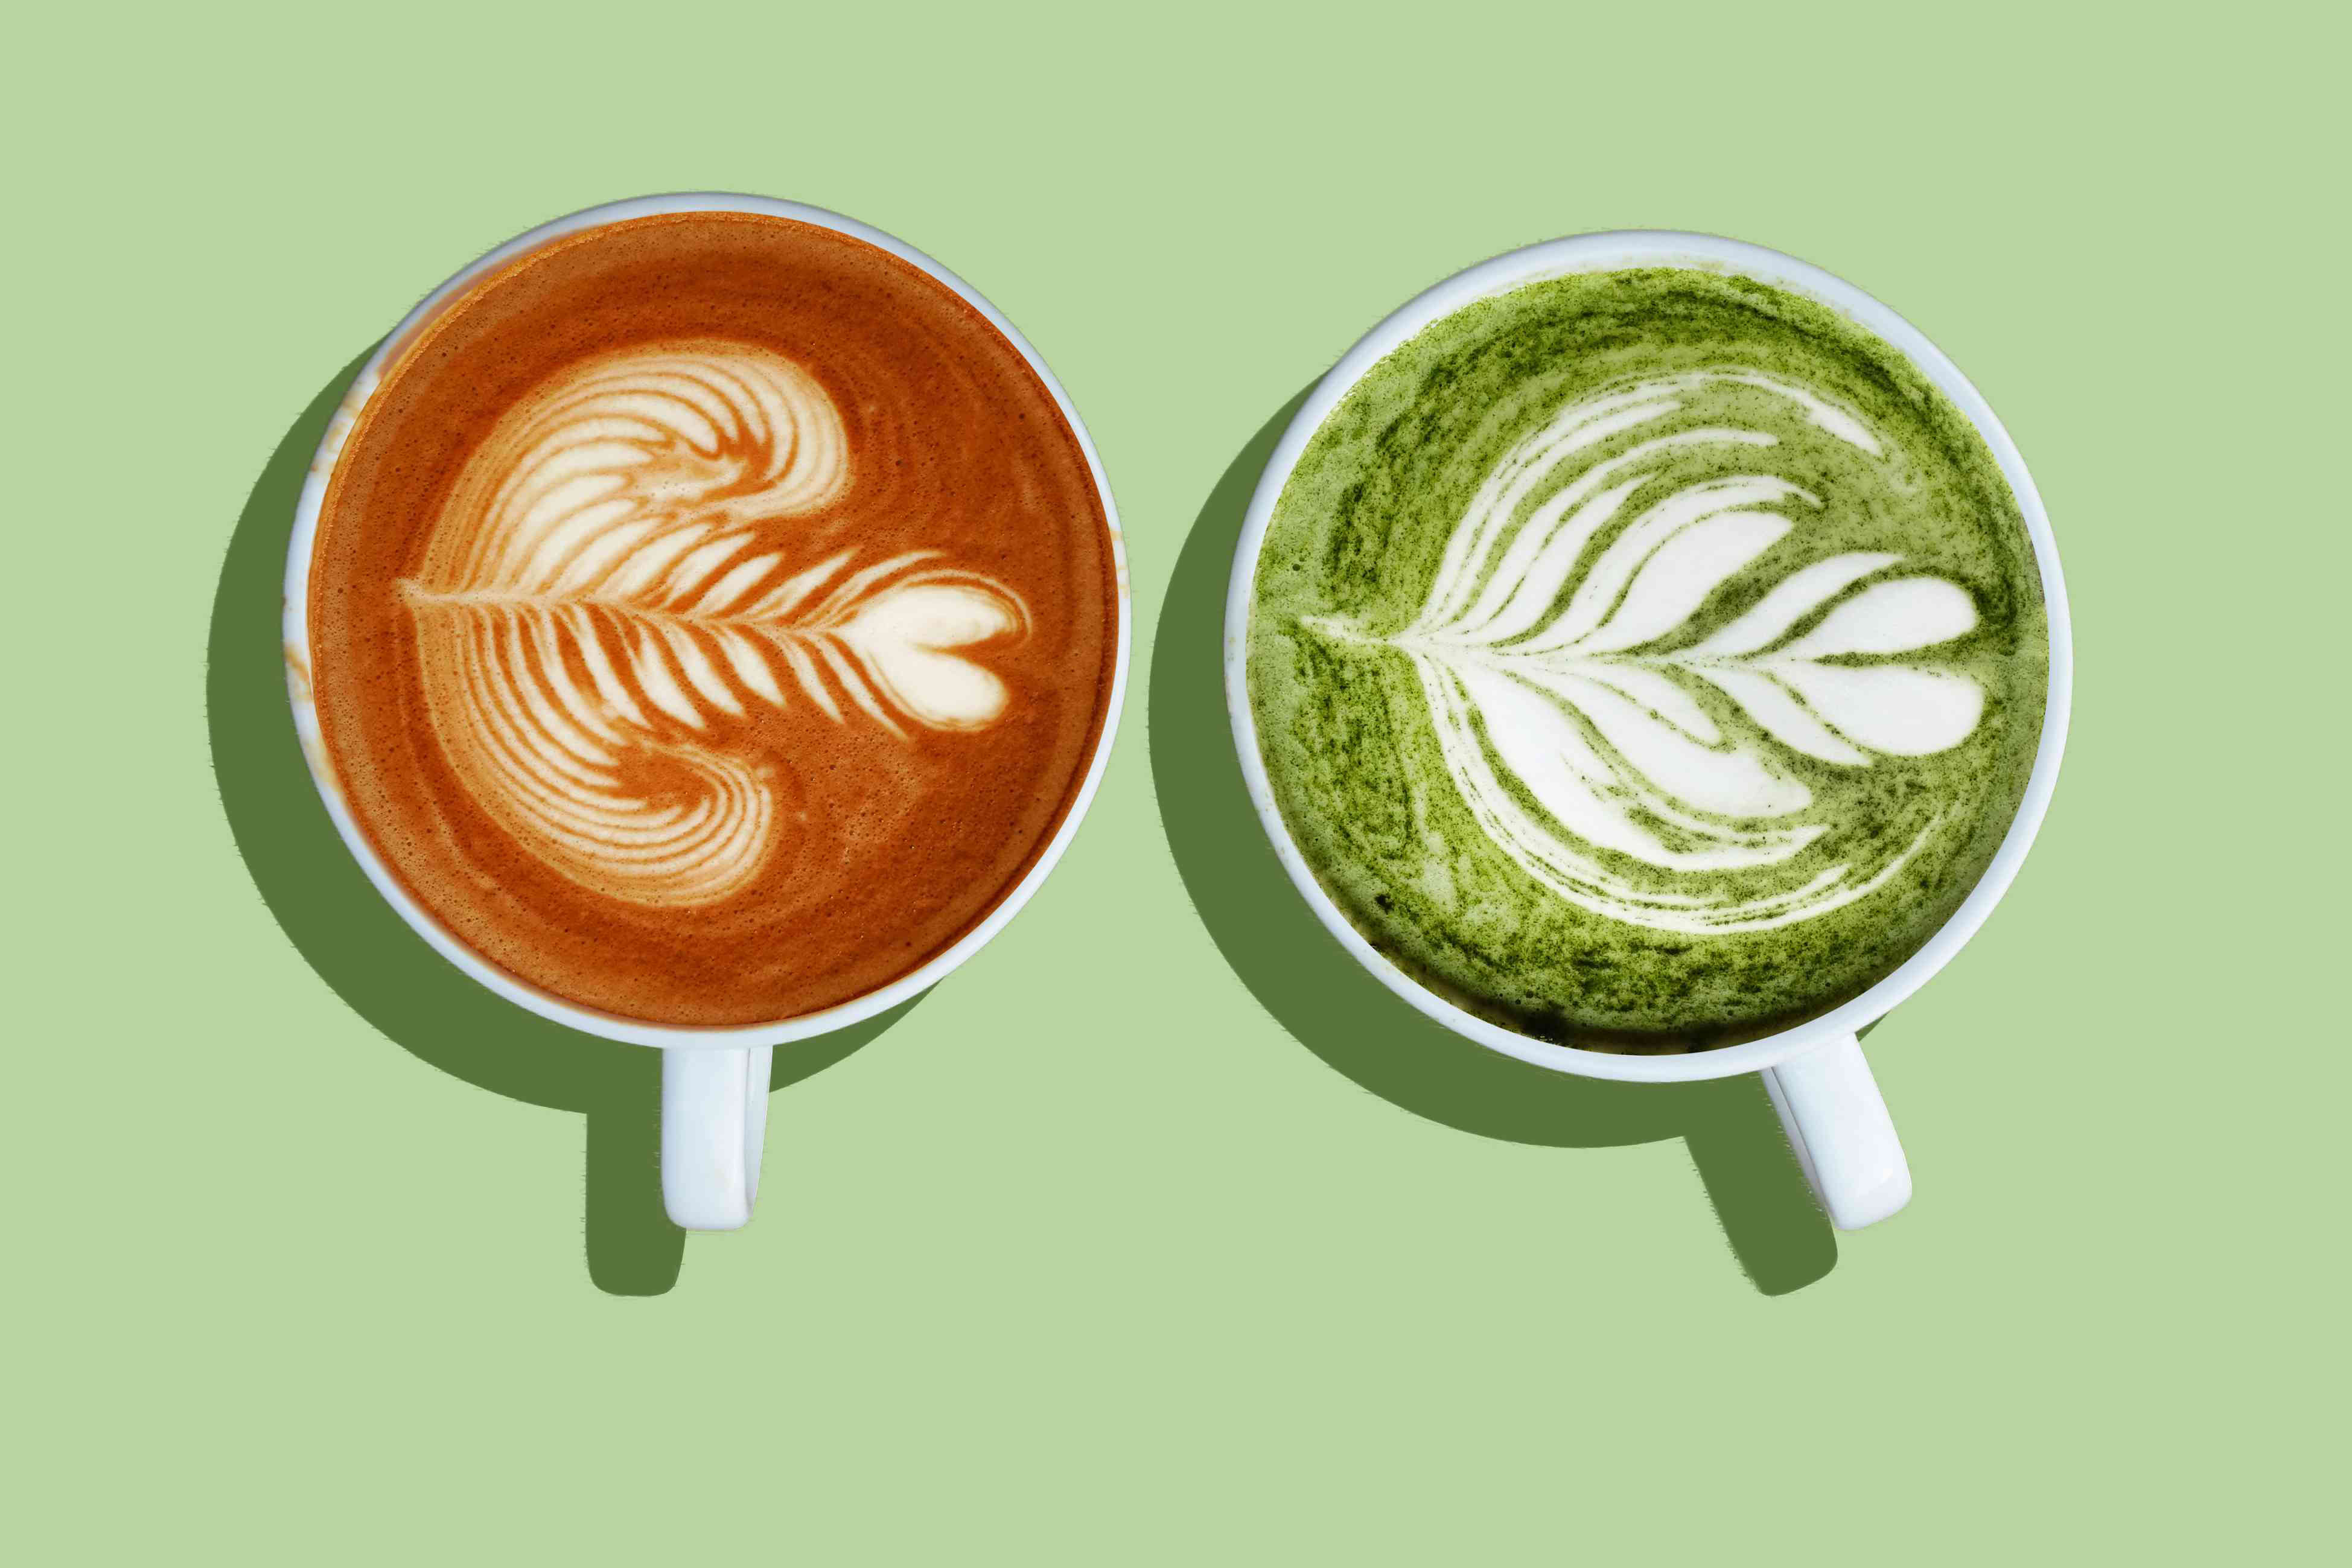 Matcha vs. Coffee: Which One Has More Caffeine (and Health Benefits)?